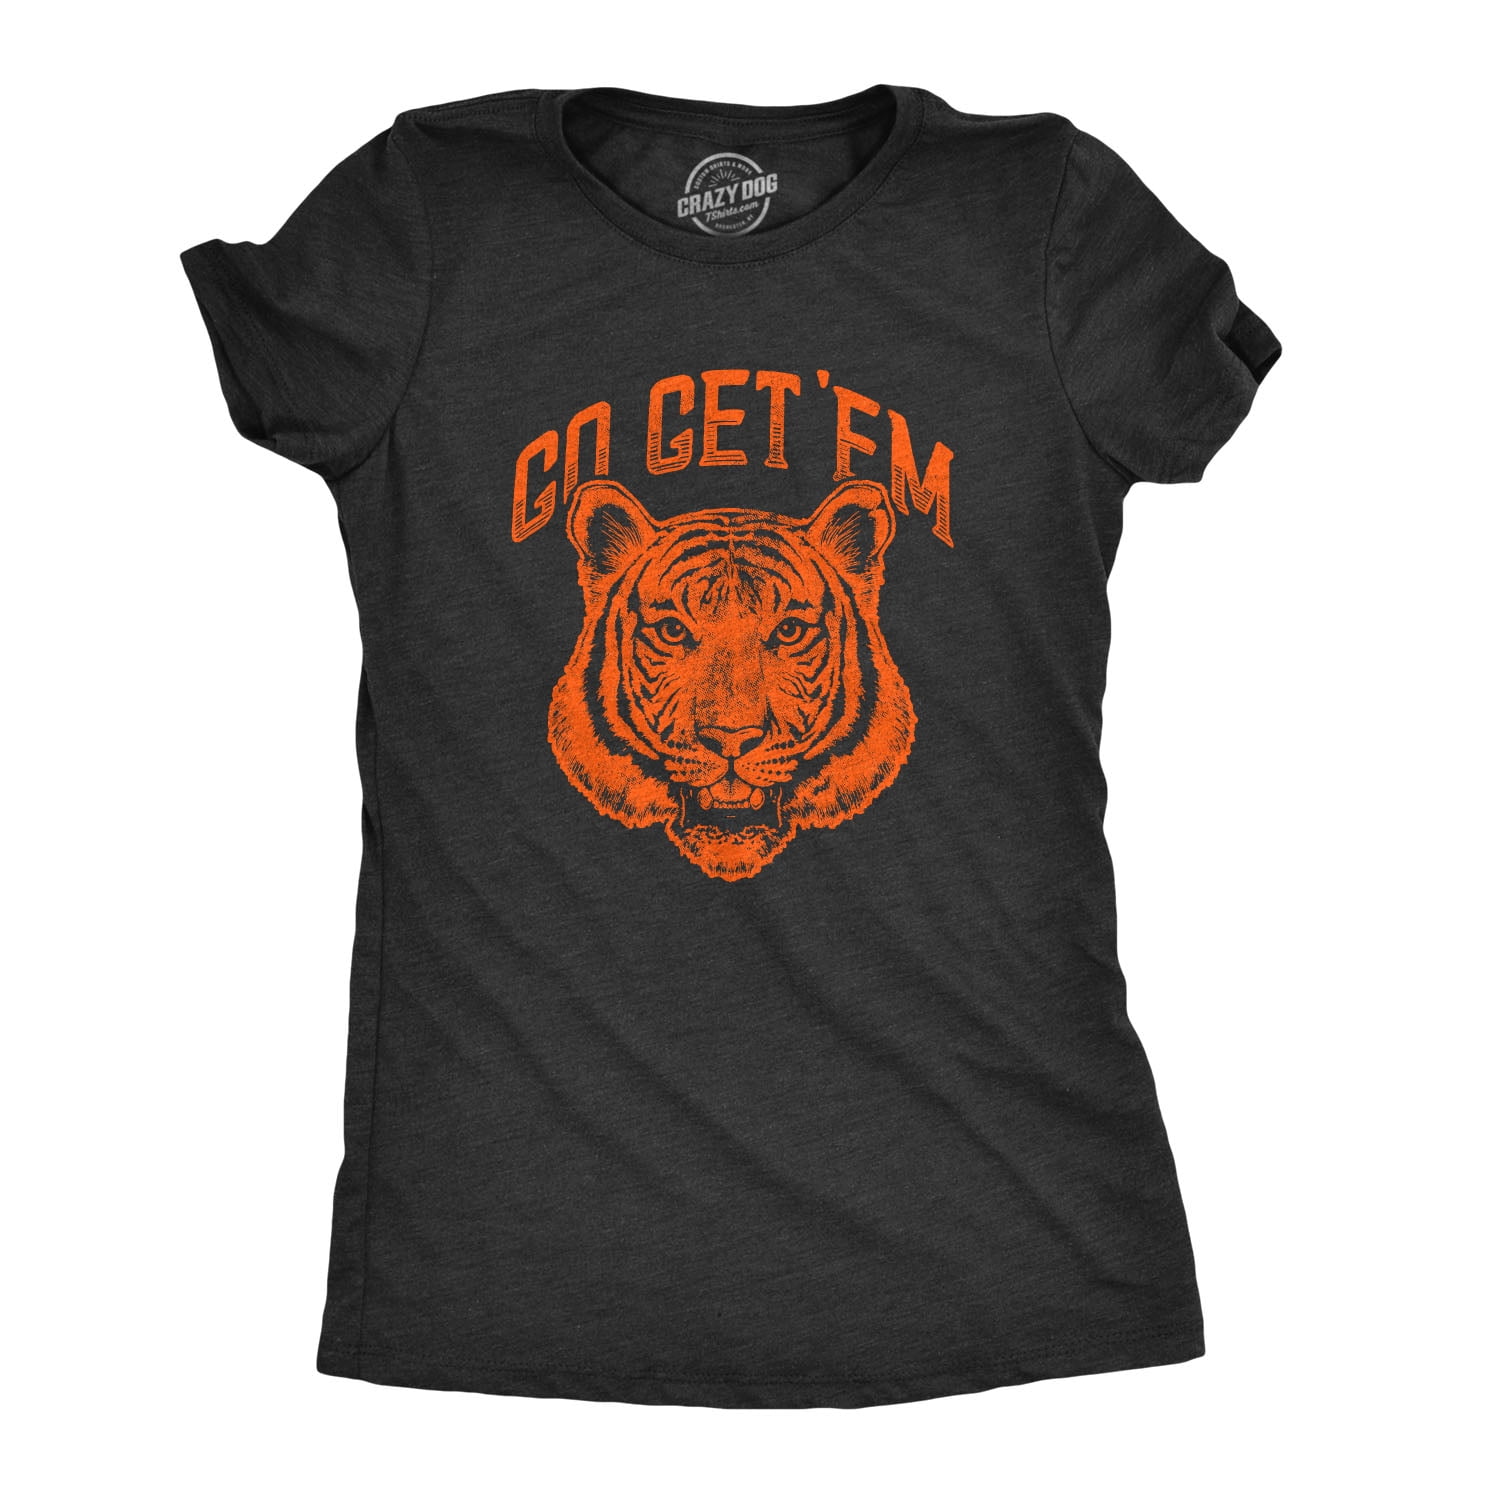 Women's Oversized T-Shirt Tropical Jungle Vintage Tee Get em Tiger Gif for her Tiger Graphic Tee